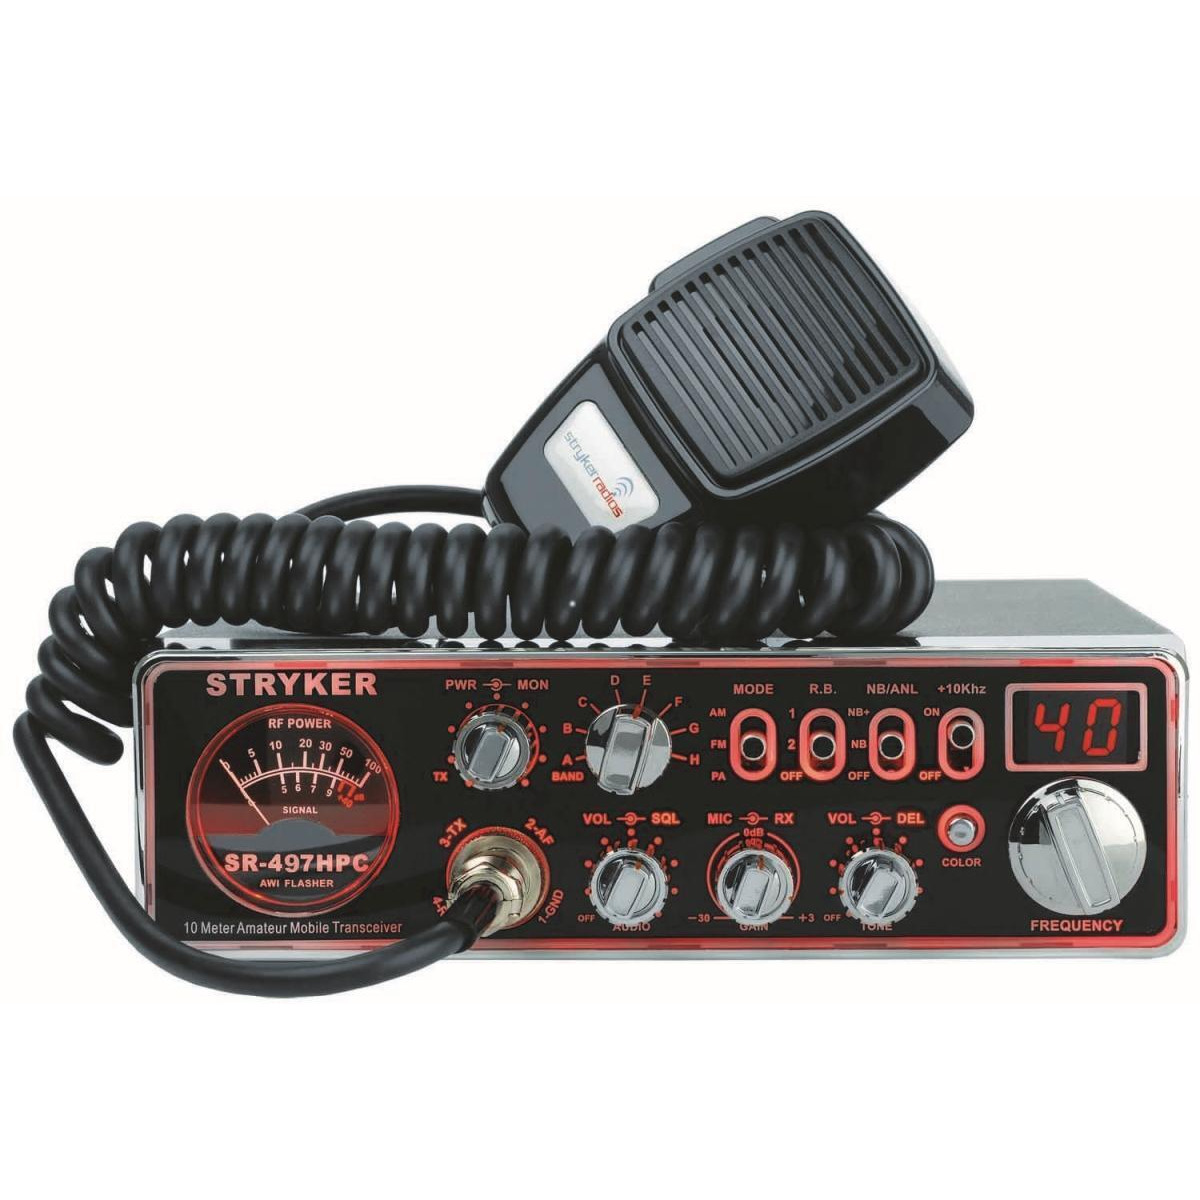 Stryker SR497HPC 110W 10m Radio with 7 Color Selectable Faceplate, Echo, Roger Beep, Talkback, 12 Stage Dim & Variable Power